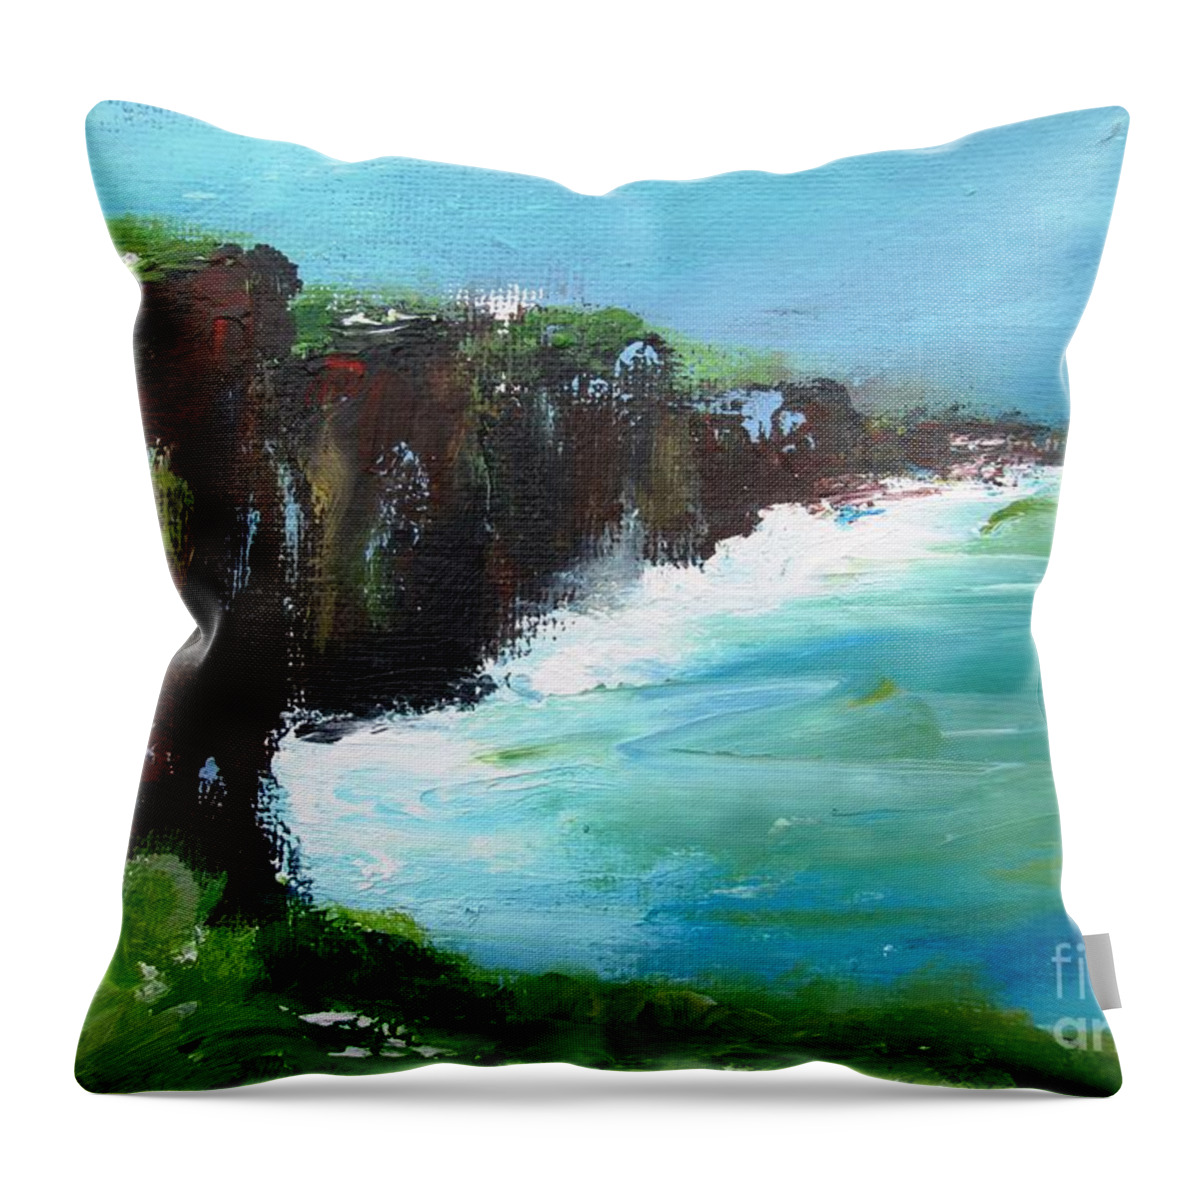 Cliffs Throw Pillow featuring the painting Painting Of The Cliffs Of Moher County Clare Ireland #1 by Mary Cahalan Lee - aka PIXI